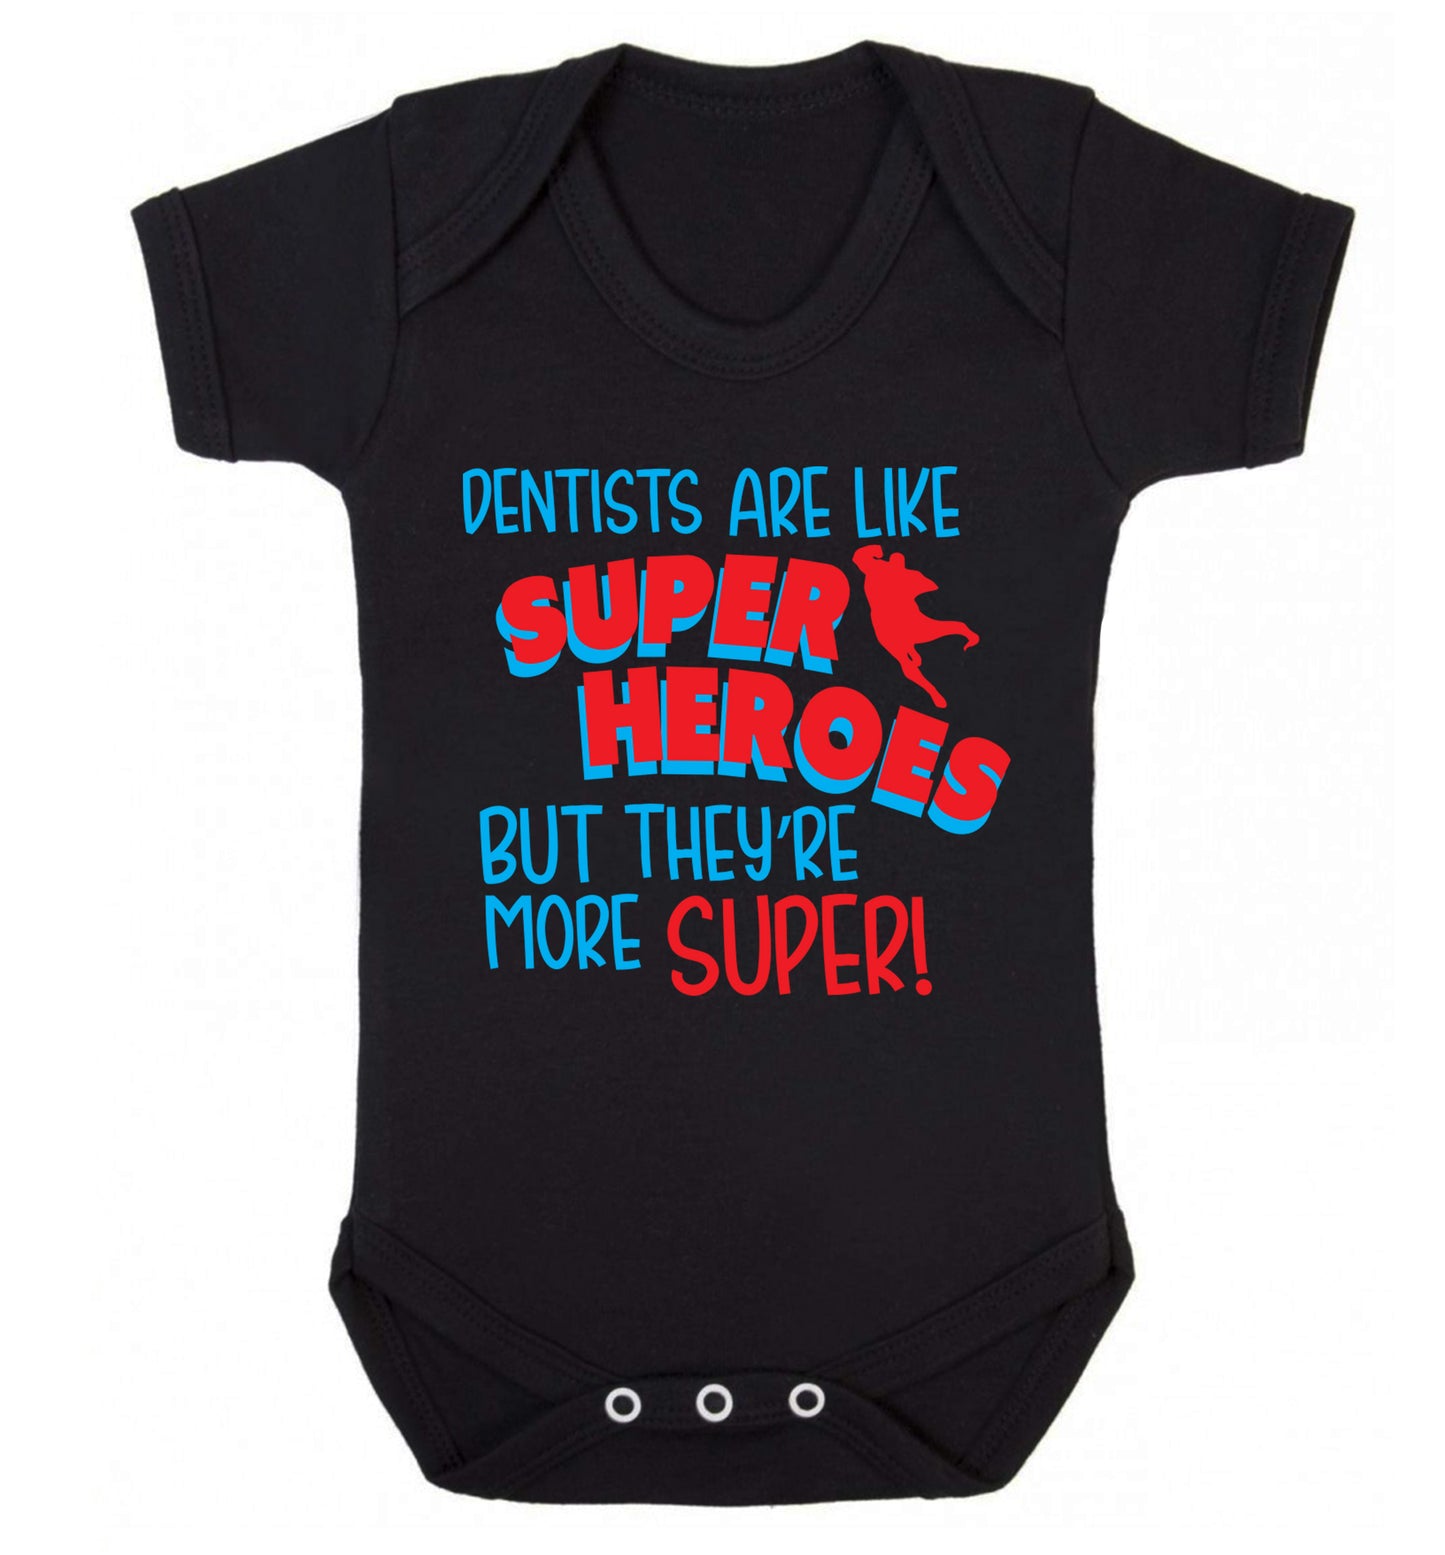 Dentists are like superheros but they're more super Baby Vest black 18-24 months